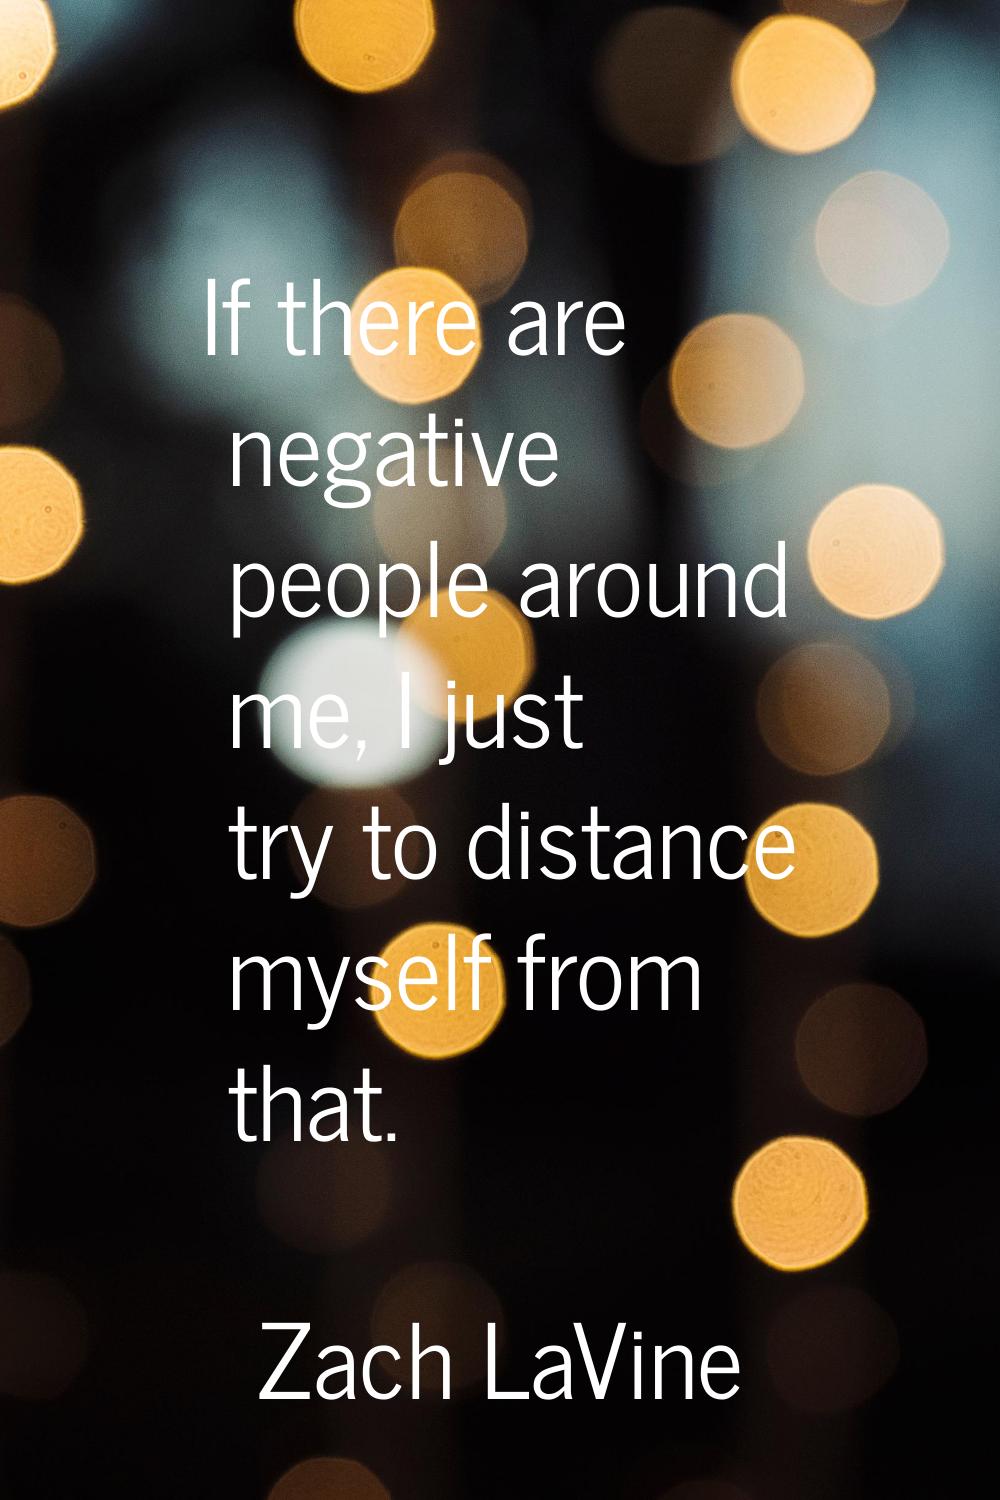 If there are negative people around me, I just try to distance myself from that.